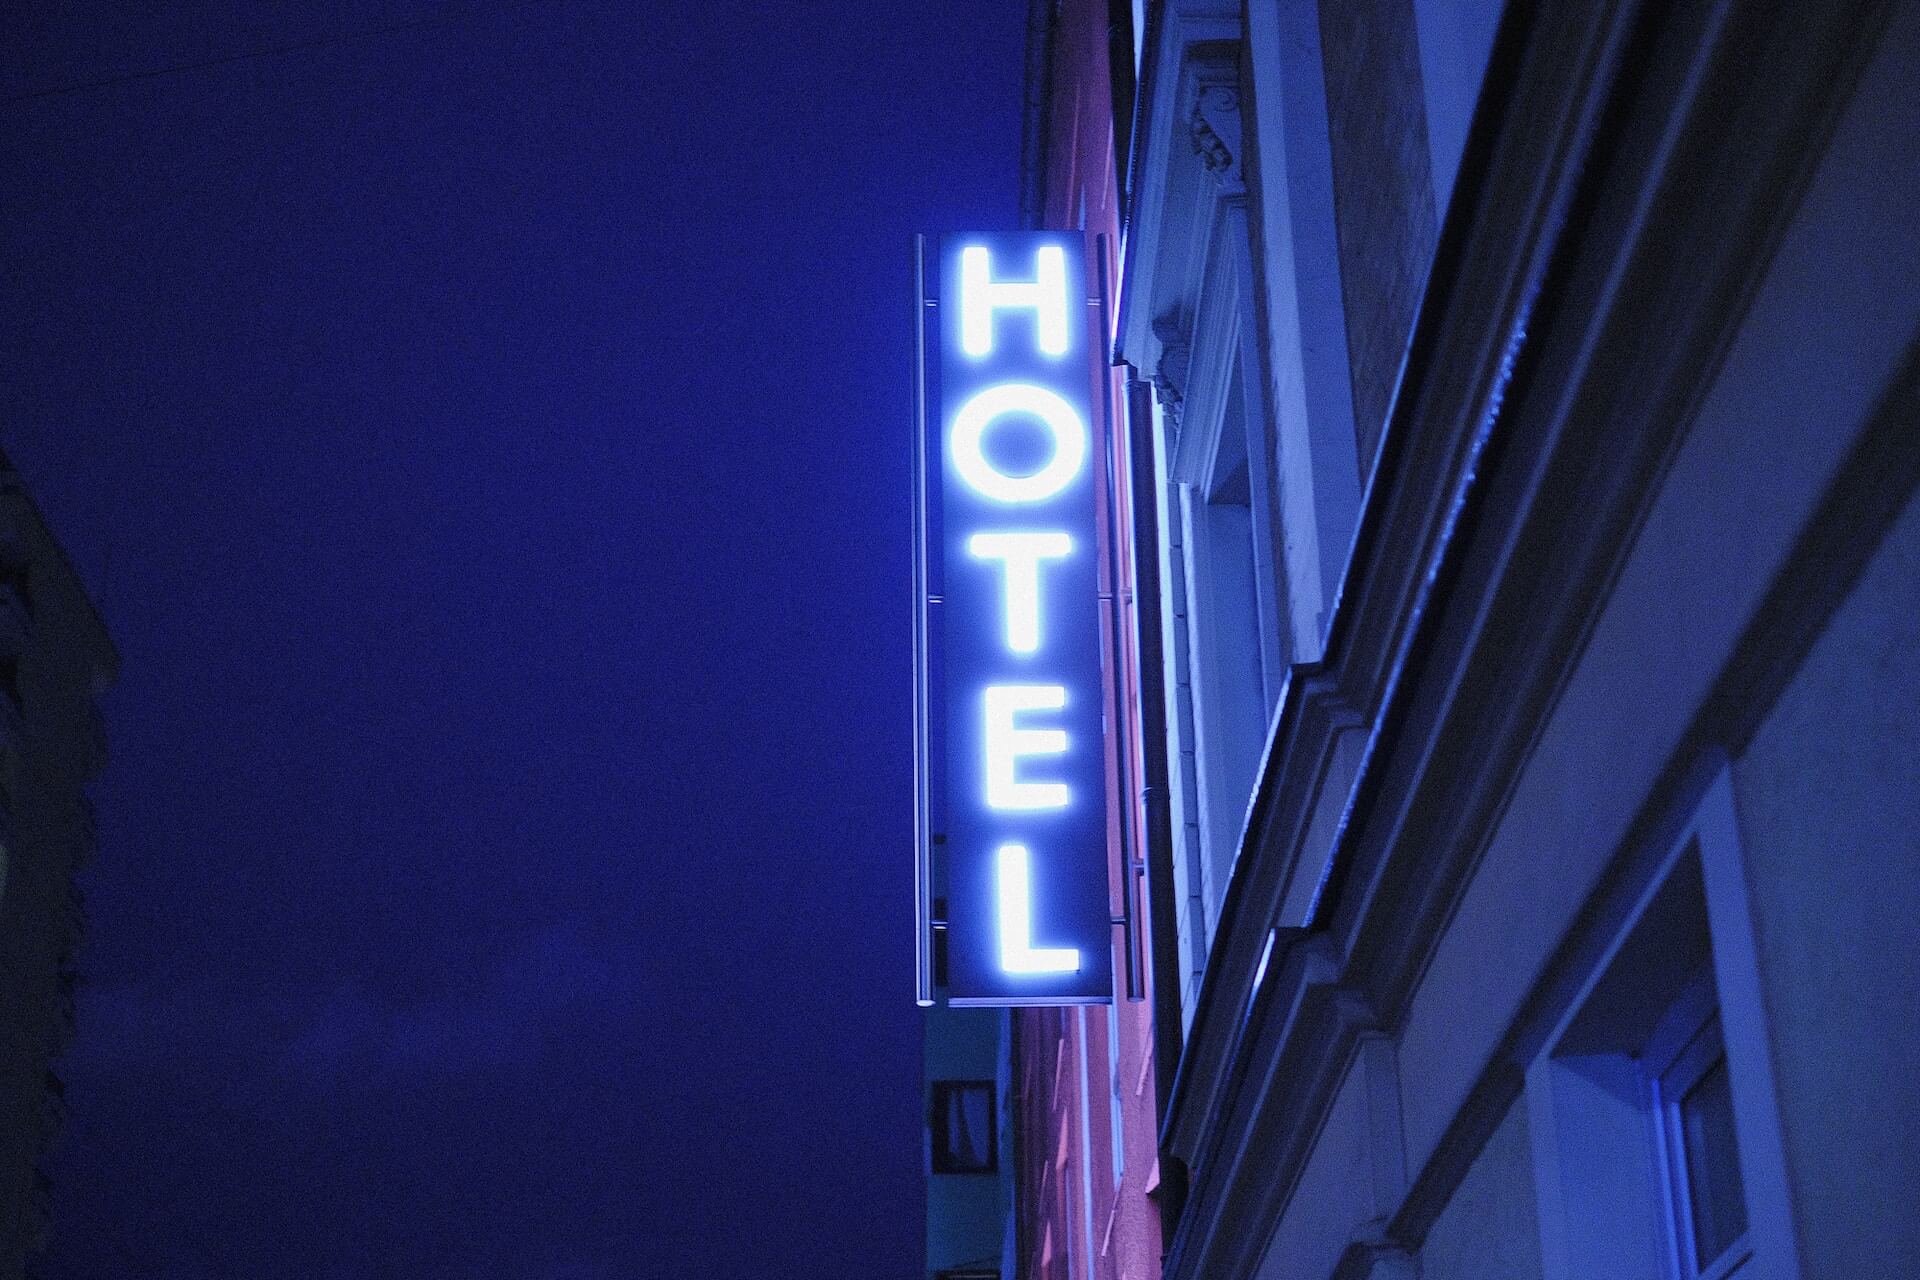 Photo of a luminous hotel sign with the word 'Hotel' in bright letters